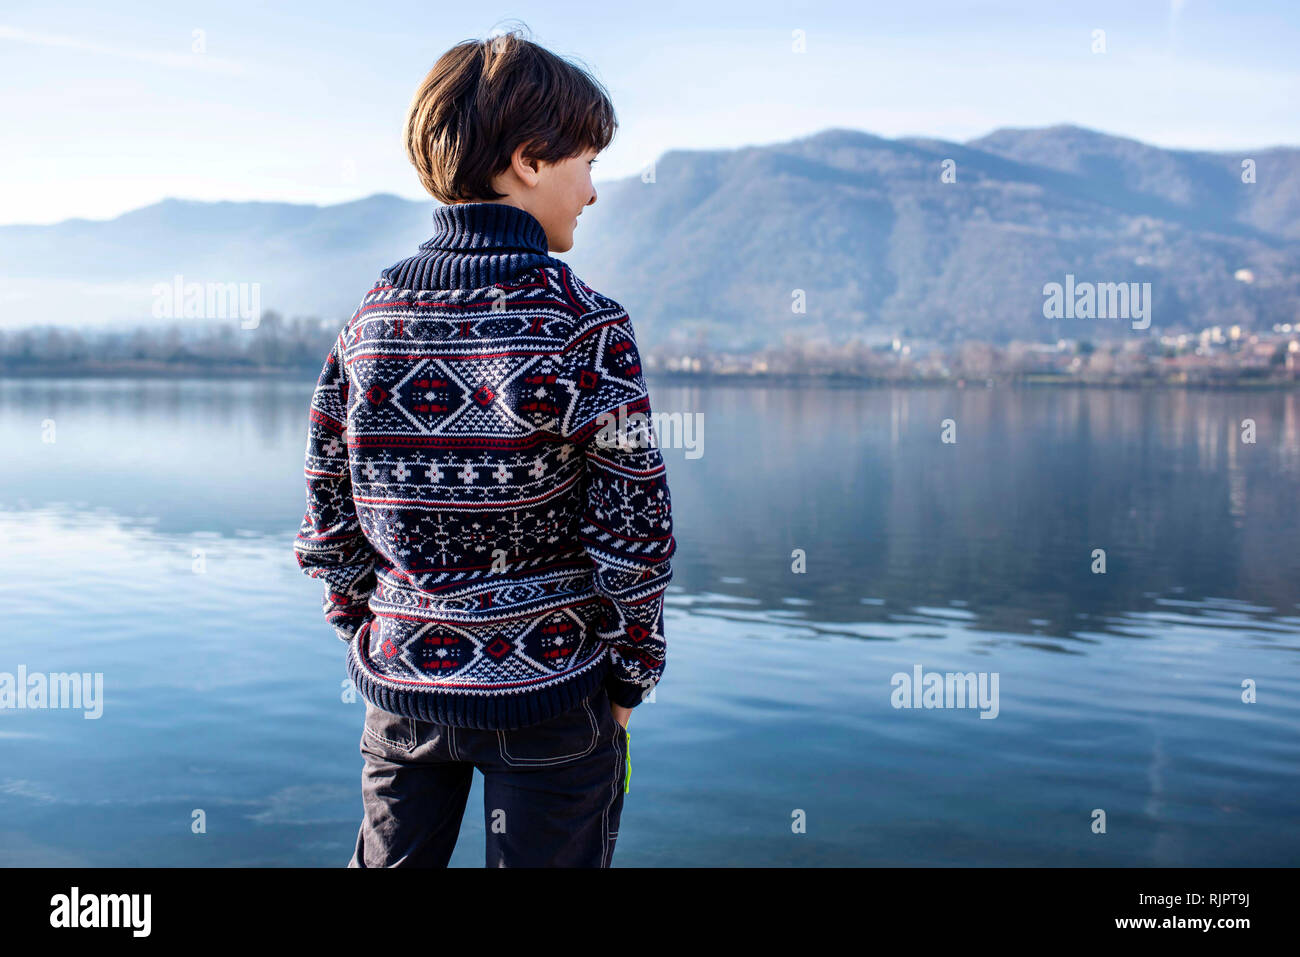 Boy looking out from lakeside, rear view, Lake Como, Lecco, Lombardy, Italy Stock Photo